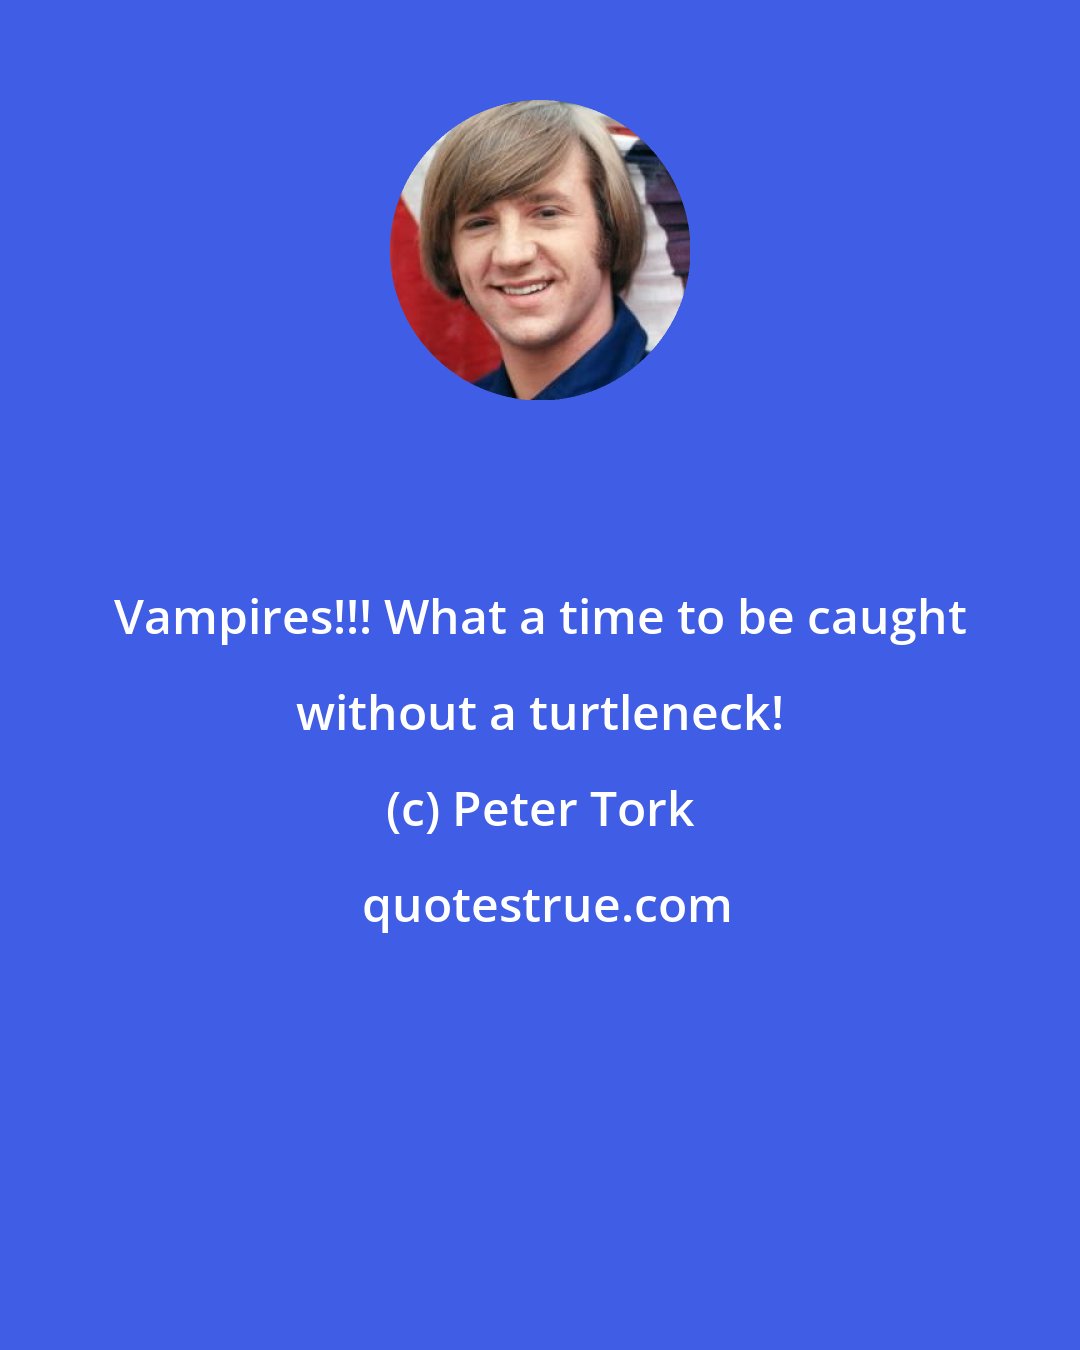 Peter Tork: Vampires!!! What a time to be caught without a turtleneck!